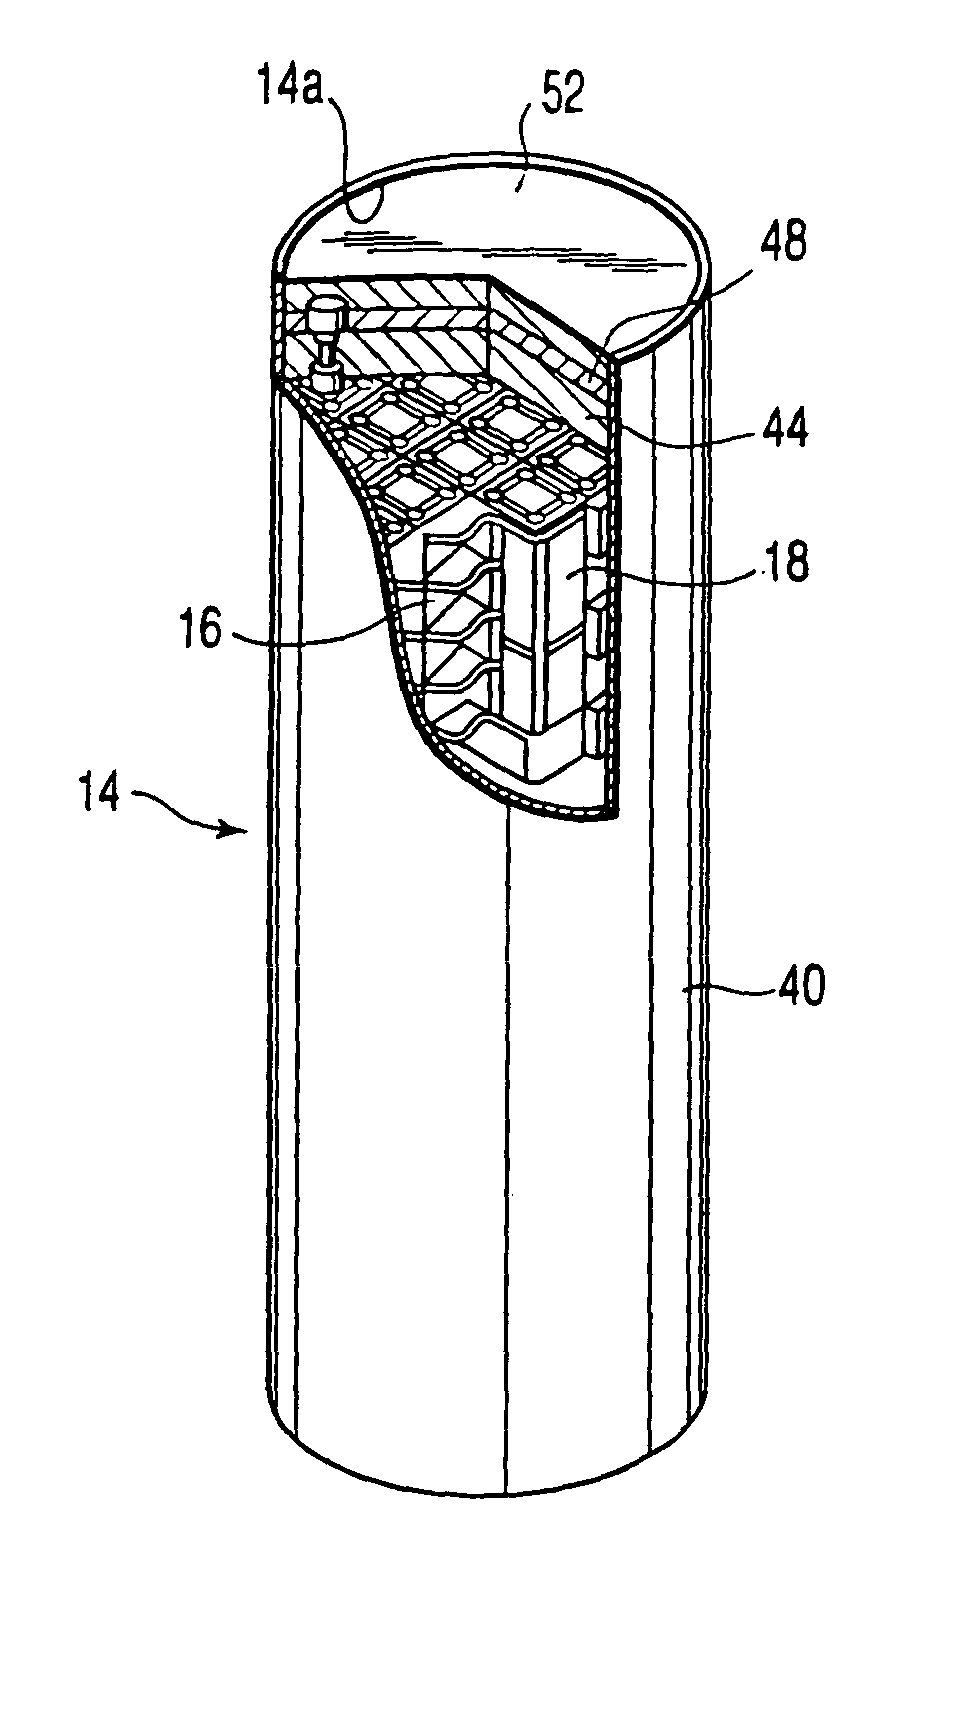 Closed vessel for radioactive substance, seal-welding method for closed vessel, and exhaust system used for seal-welding method